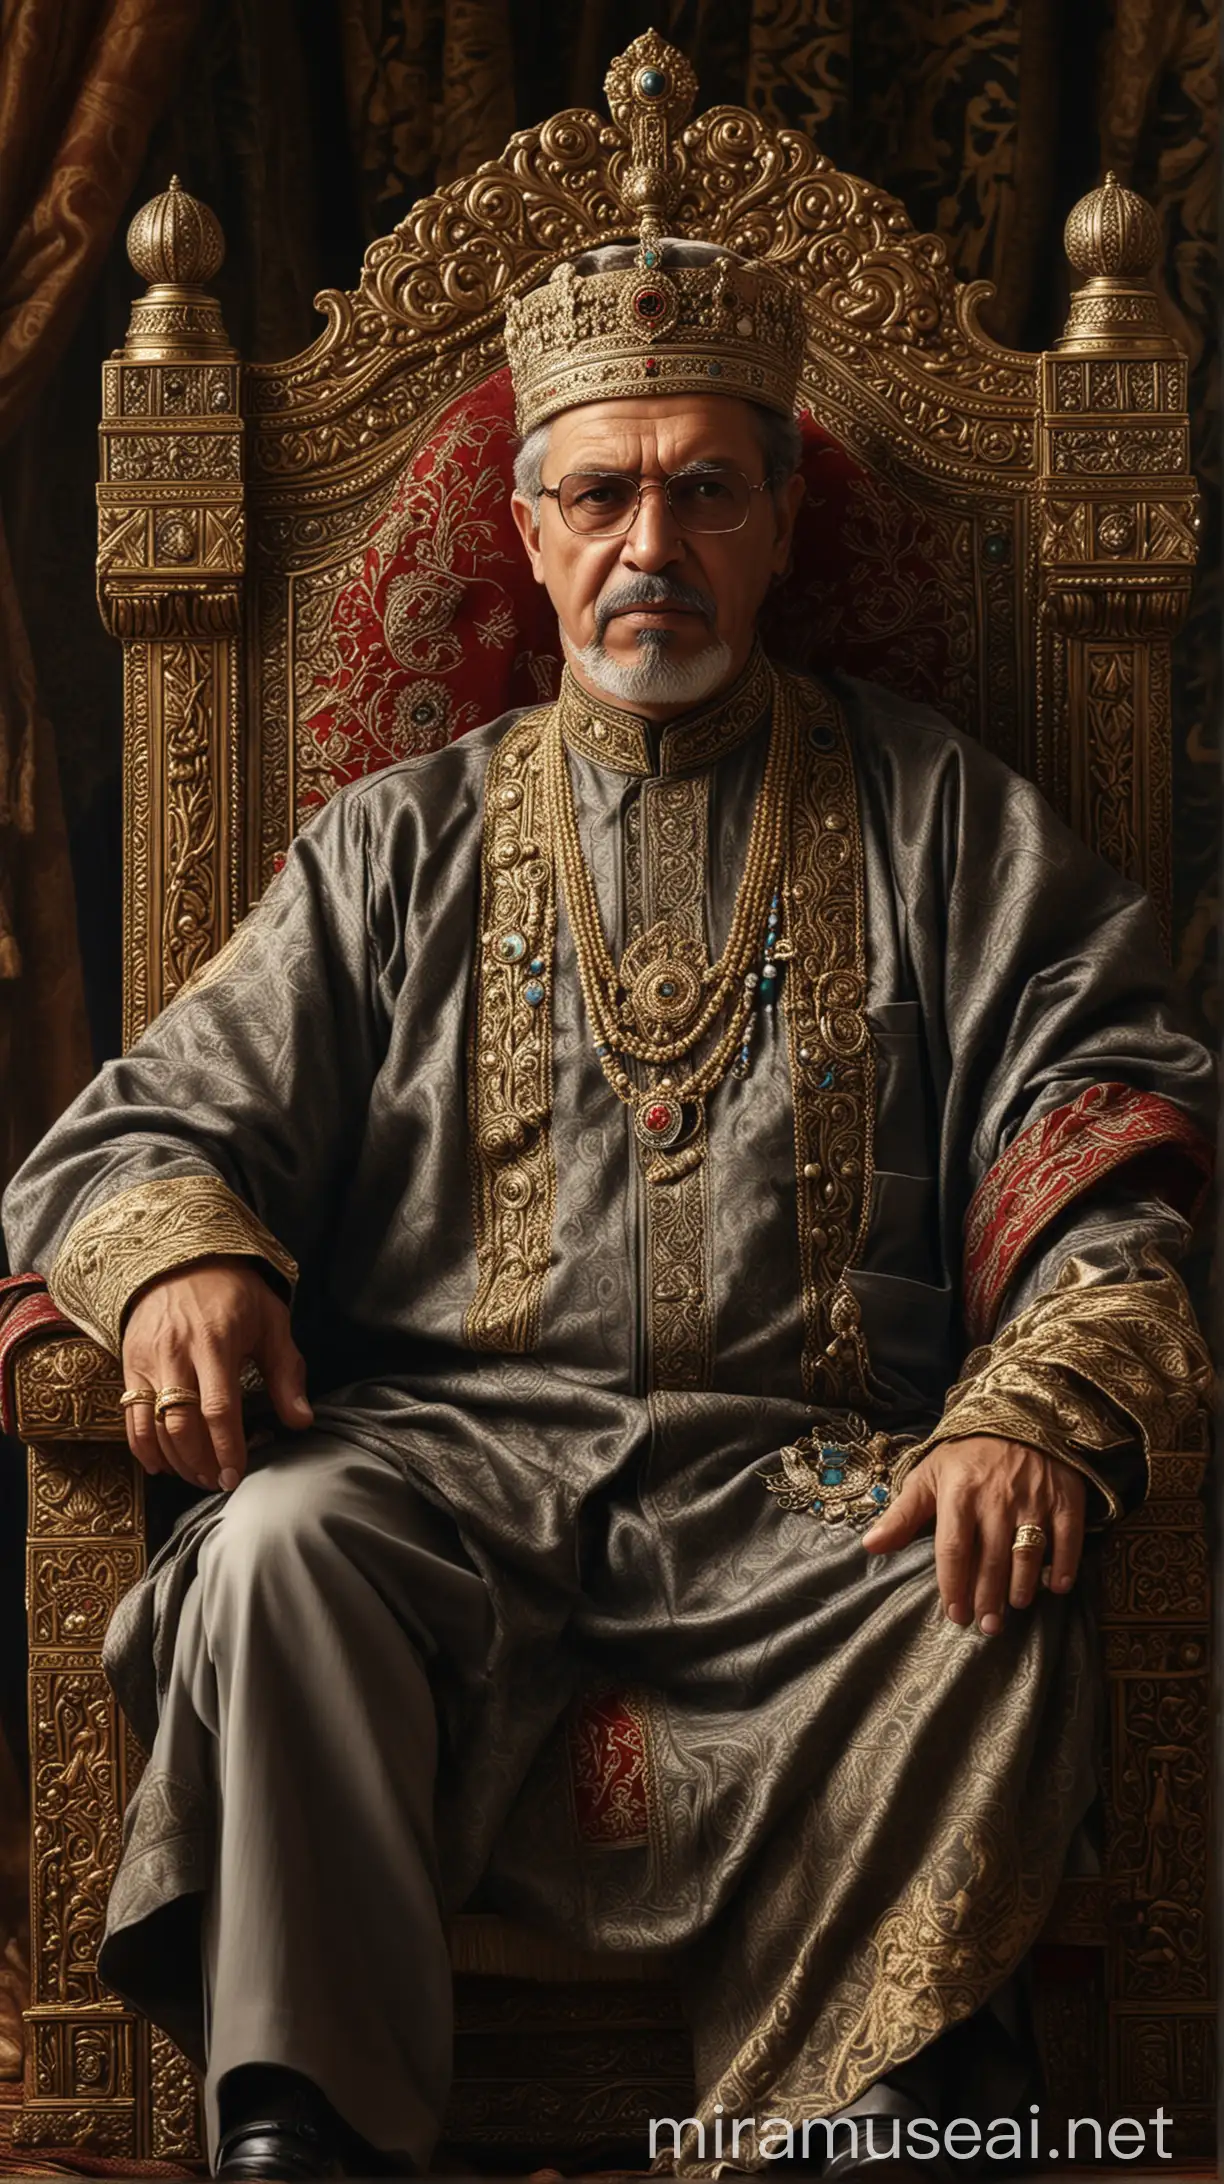 King Ismail Sharif Commands from His Majestic Throne